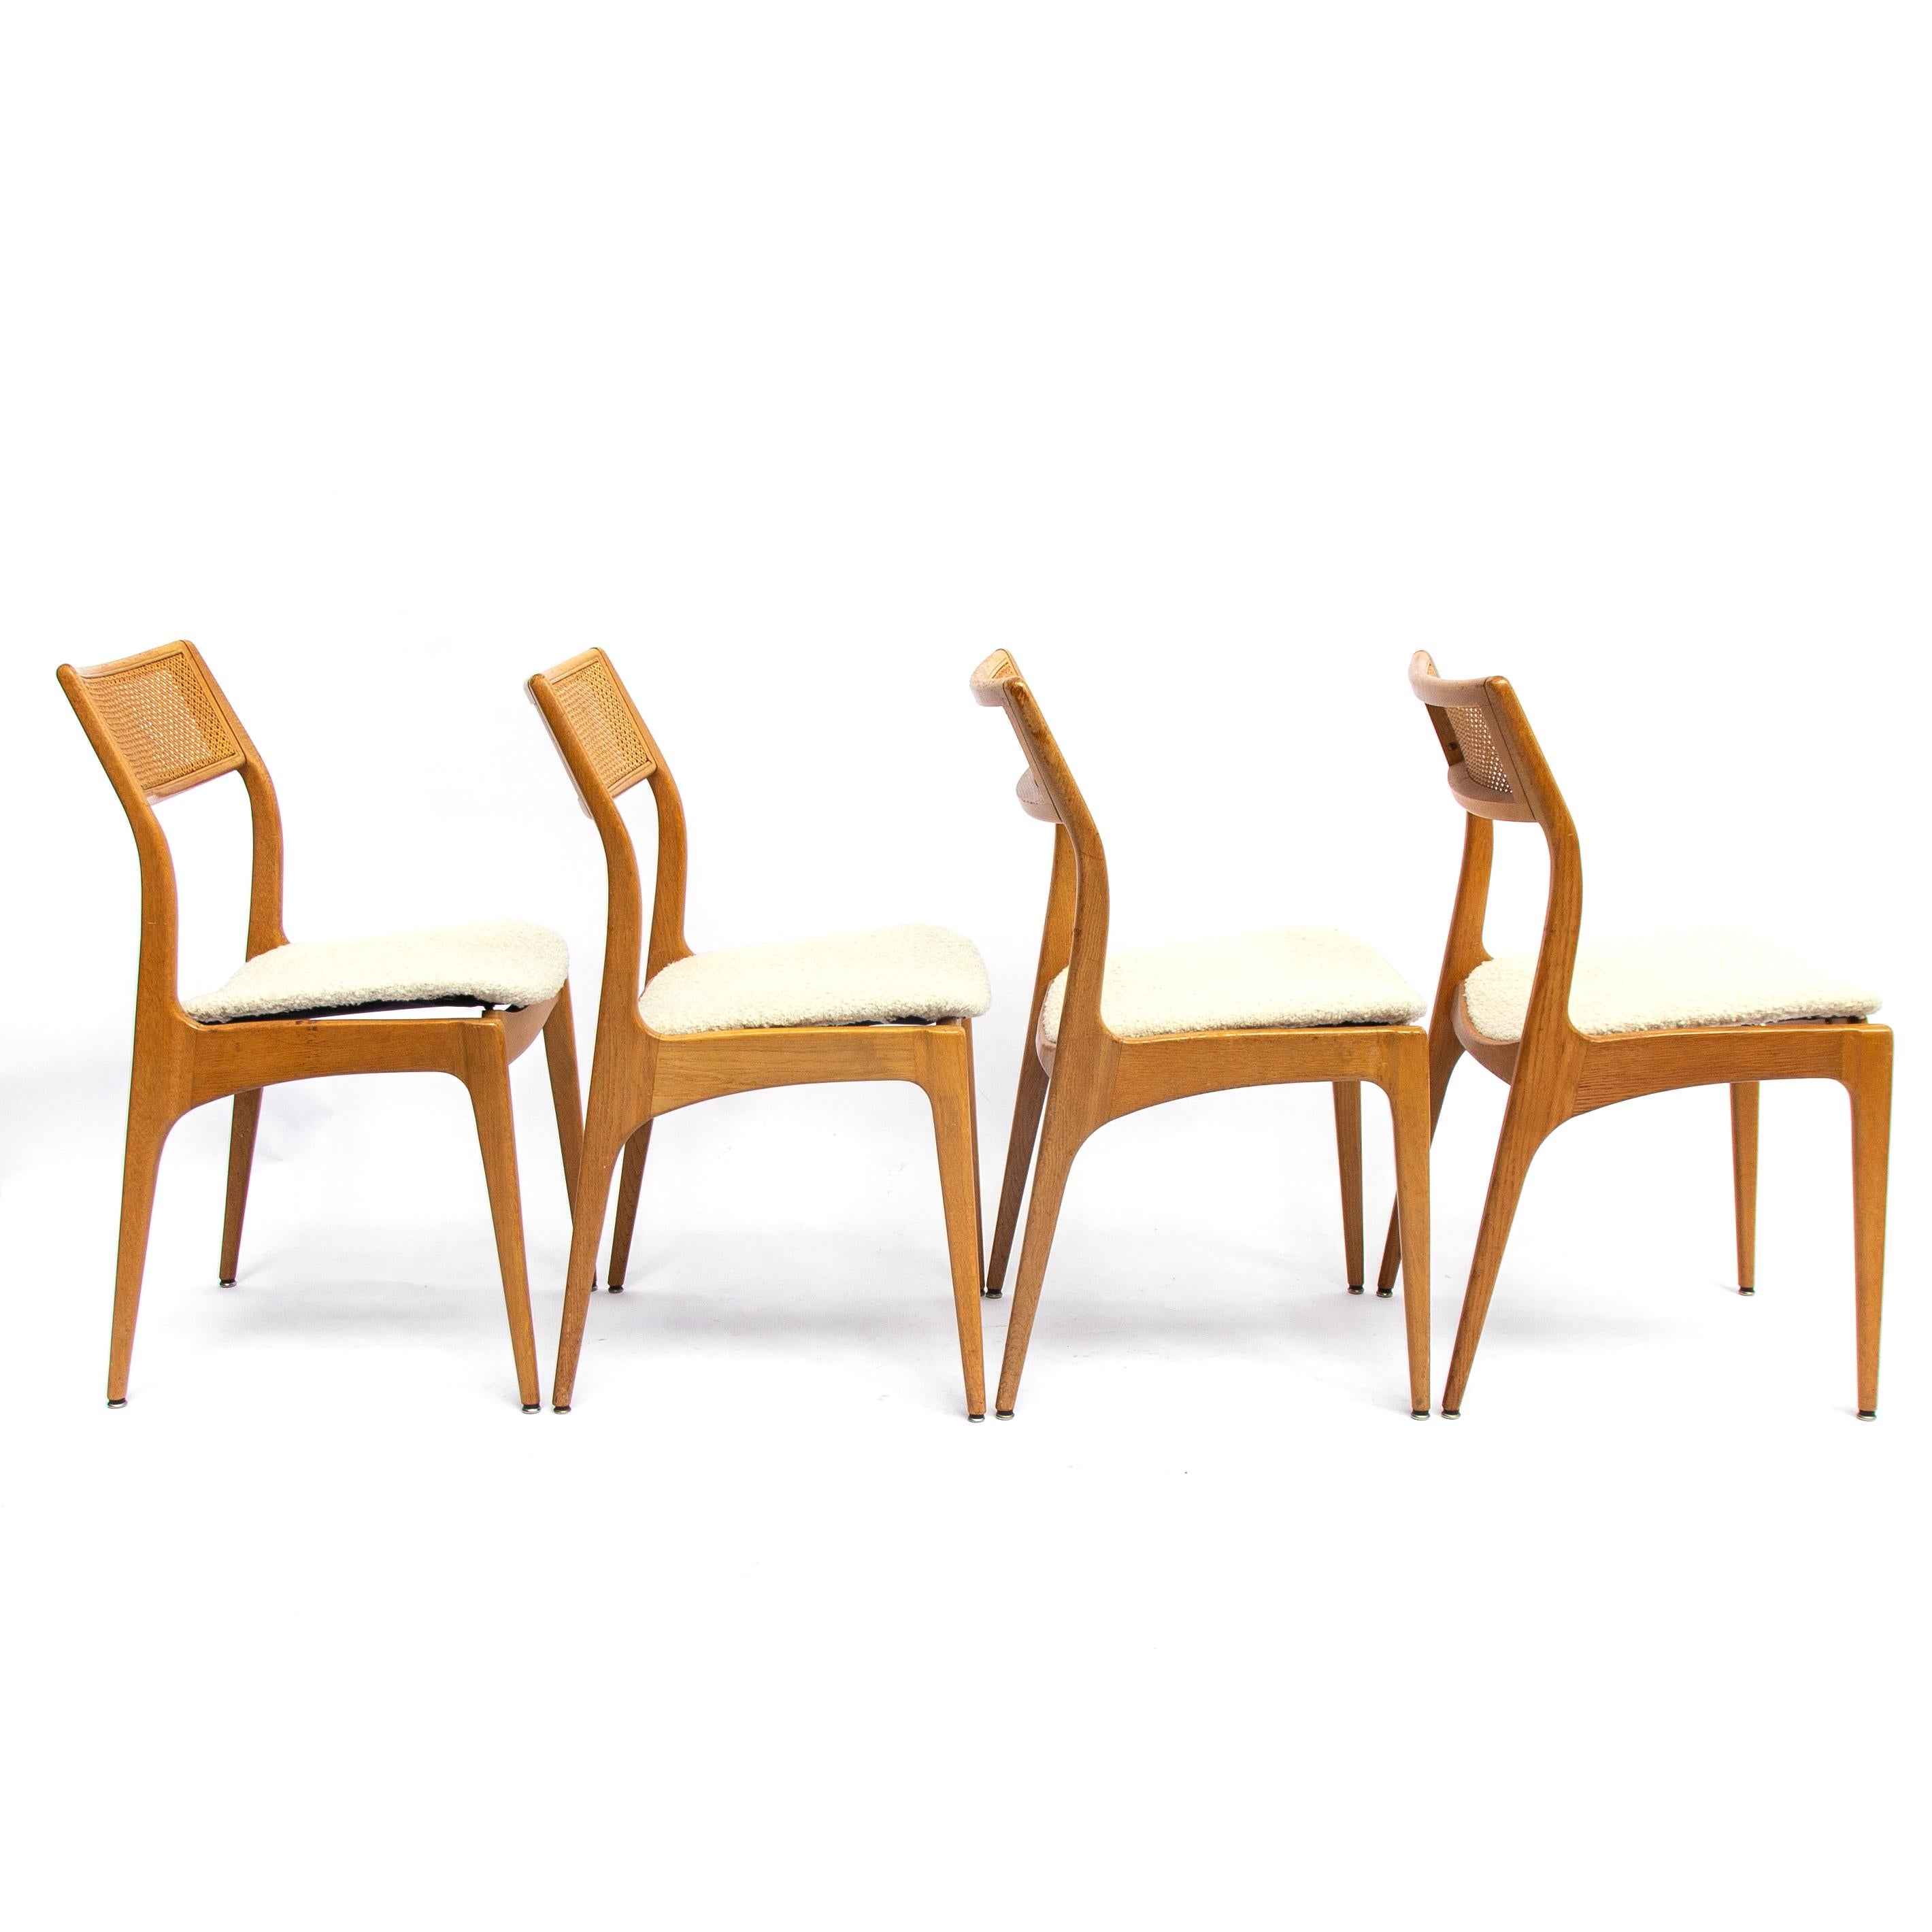 Set of four Danish midcentury oak dining chairs with a webbing back newly upholstered in white bouclé fabric. The typical soft feminine shaped edges refer to the popular Danish hand of design. These chairs are special with the diagonal webbing back.